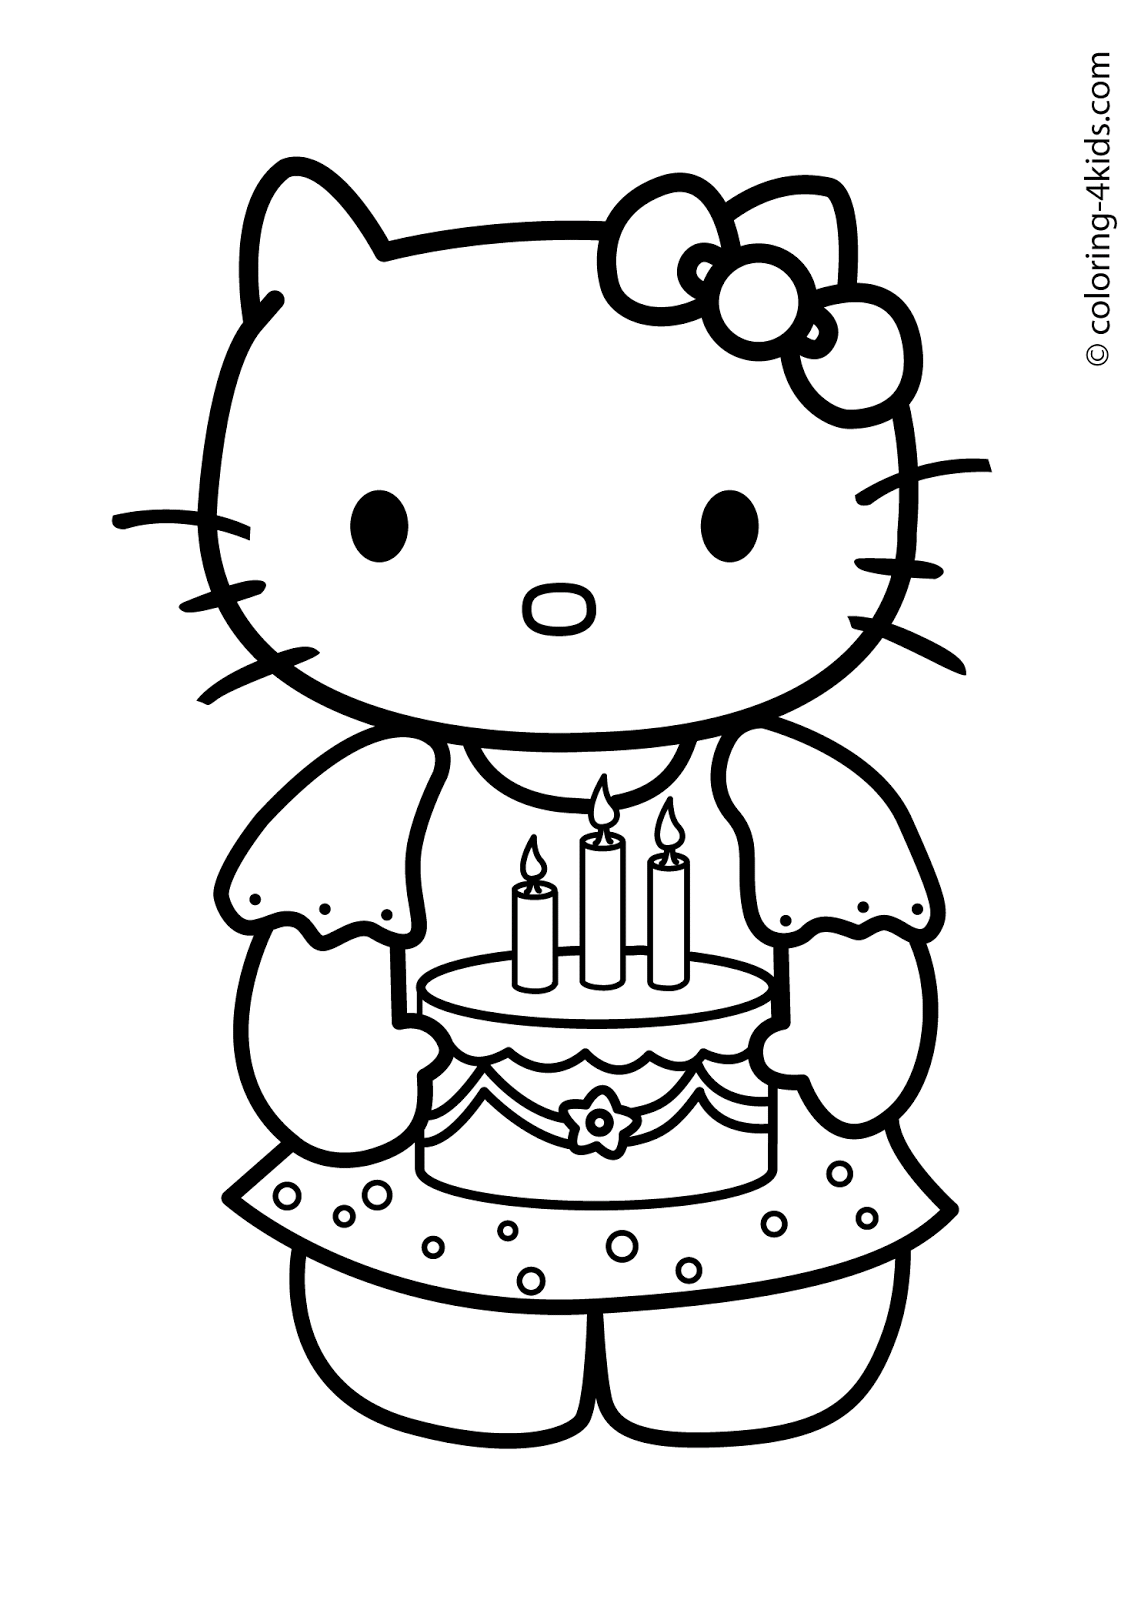 Download Best 15 Emo Hello Kitty Character Coloring Pages Pictures ...